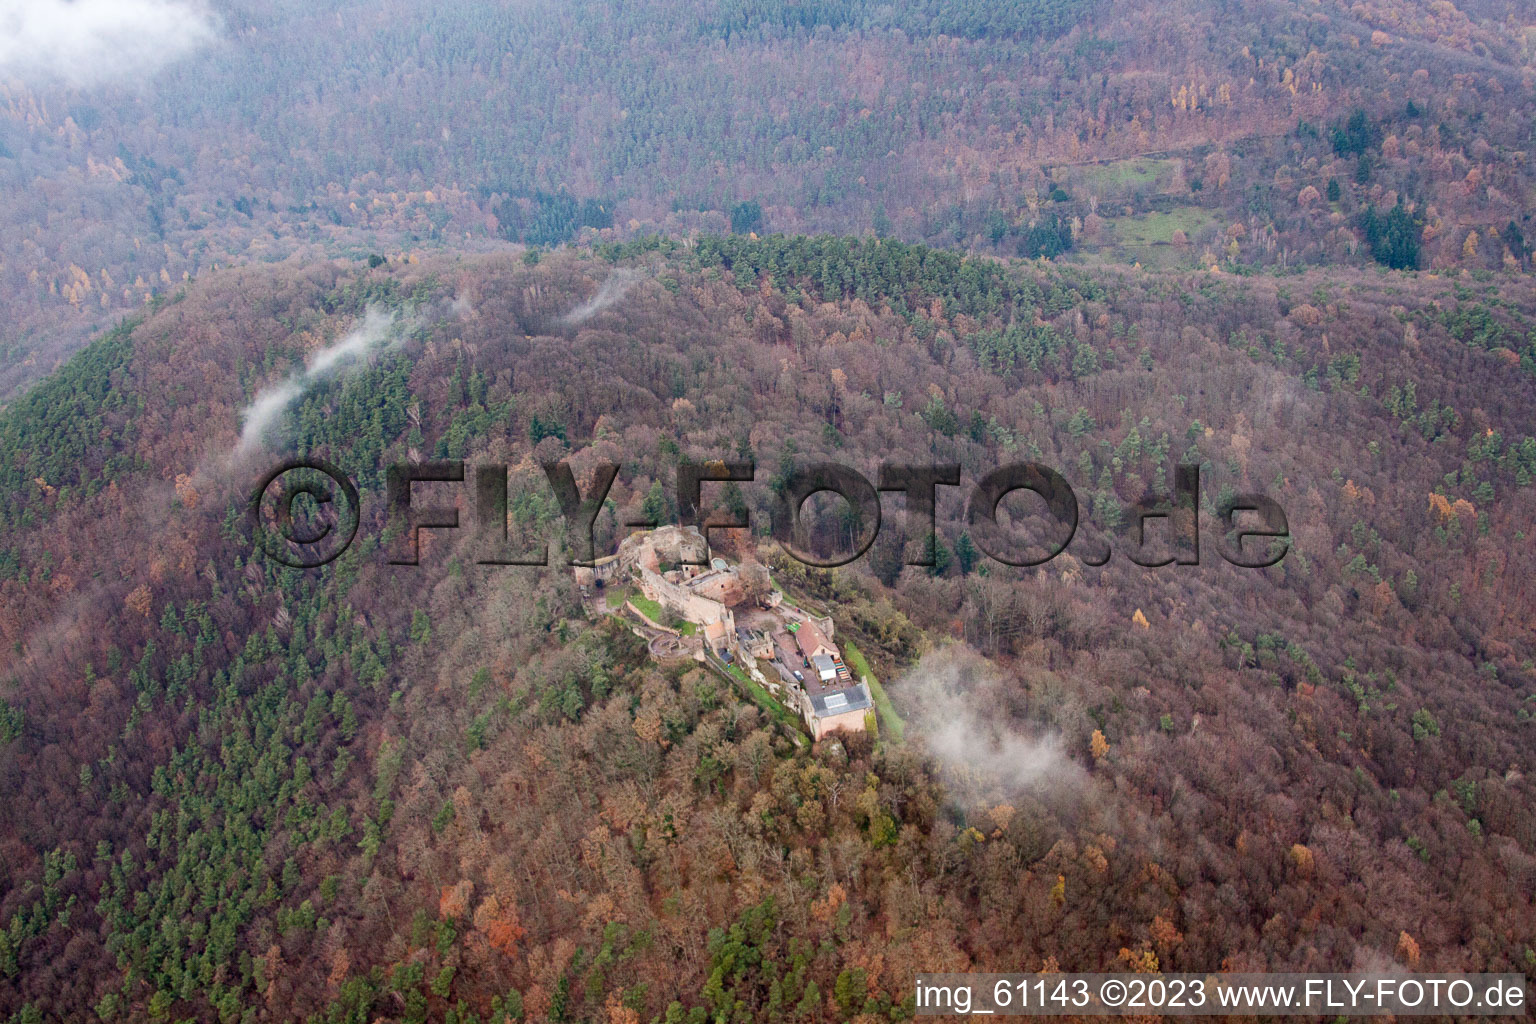 Eschbach in the state Rhineland-Palatinate, Germany seen from above